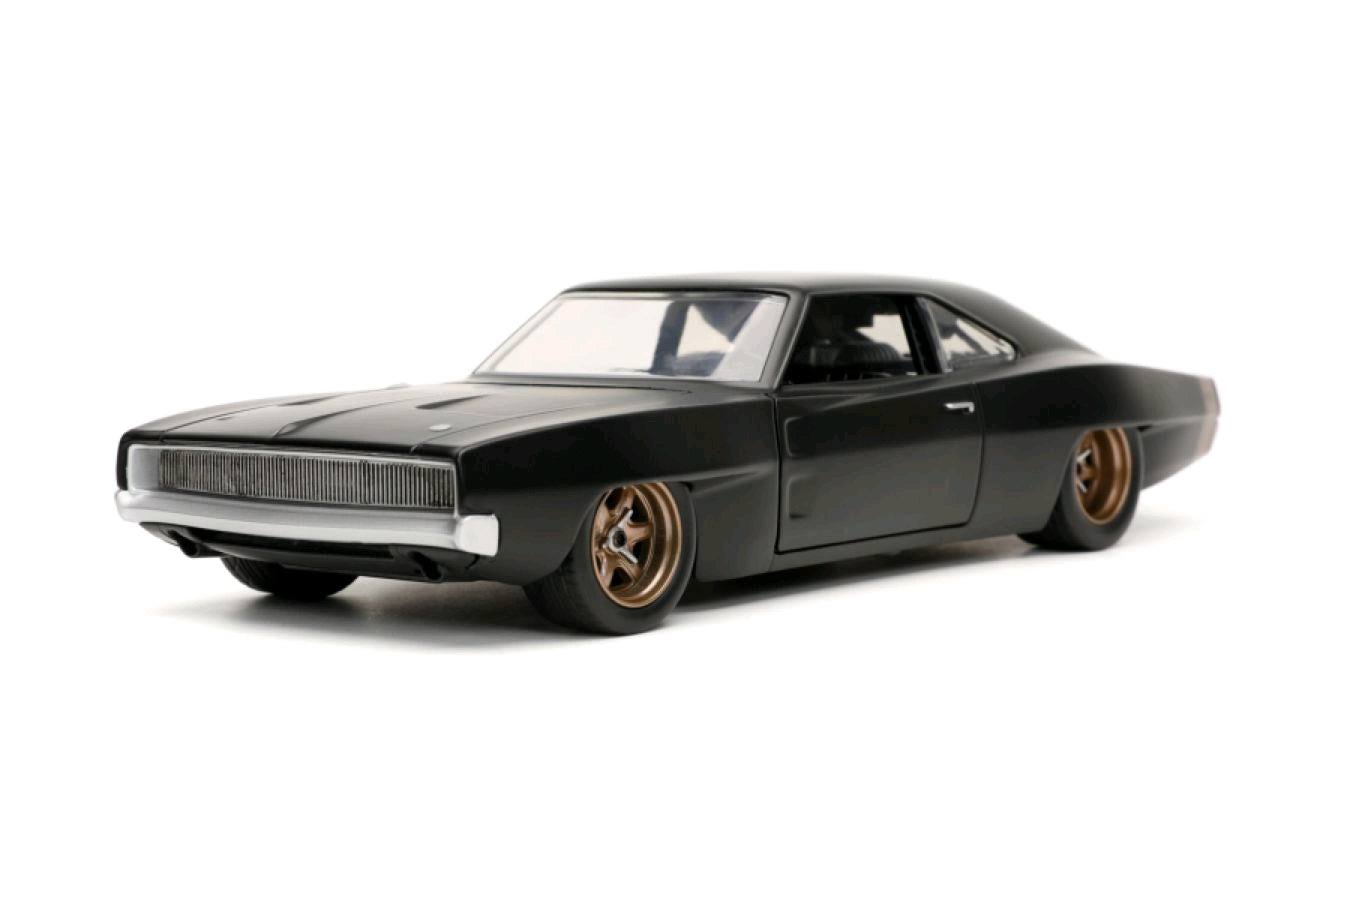 Fast & Furious 9 - 1968 Dodge Charger 1:24